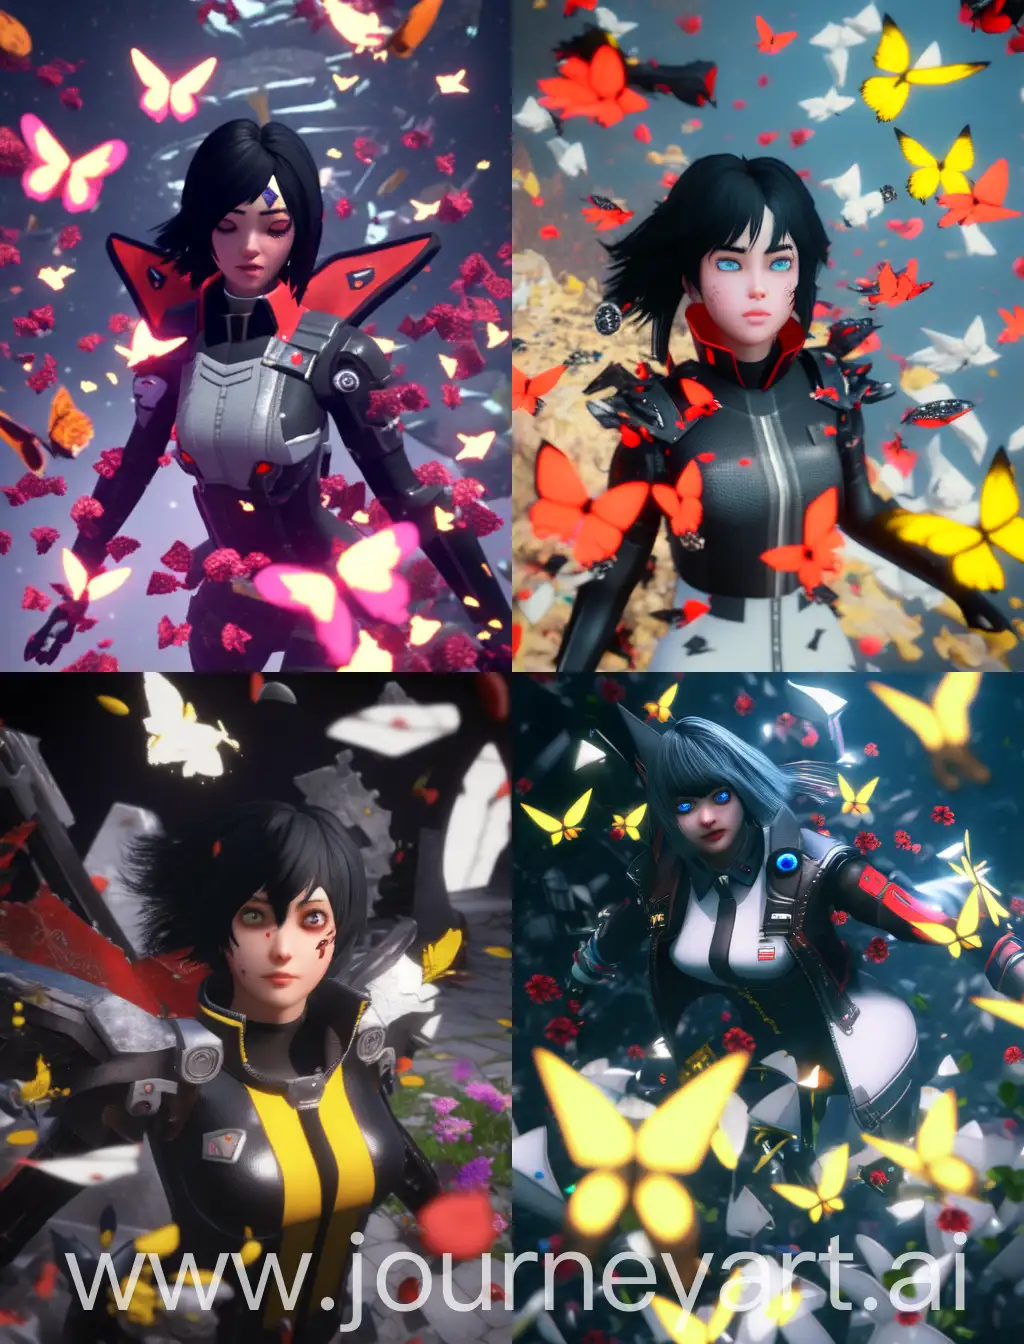 3D render,  cyberpunk girl, doll-like,  with white and black hair and yellow eyes, wearing a black jacket with red details. She has yellow butterflies flying around her and is surrounded by debris, hyperrealistic photography, 